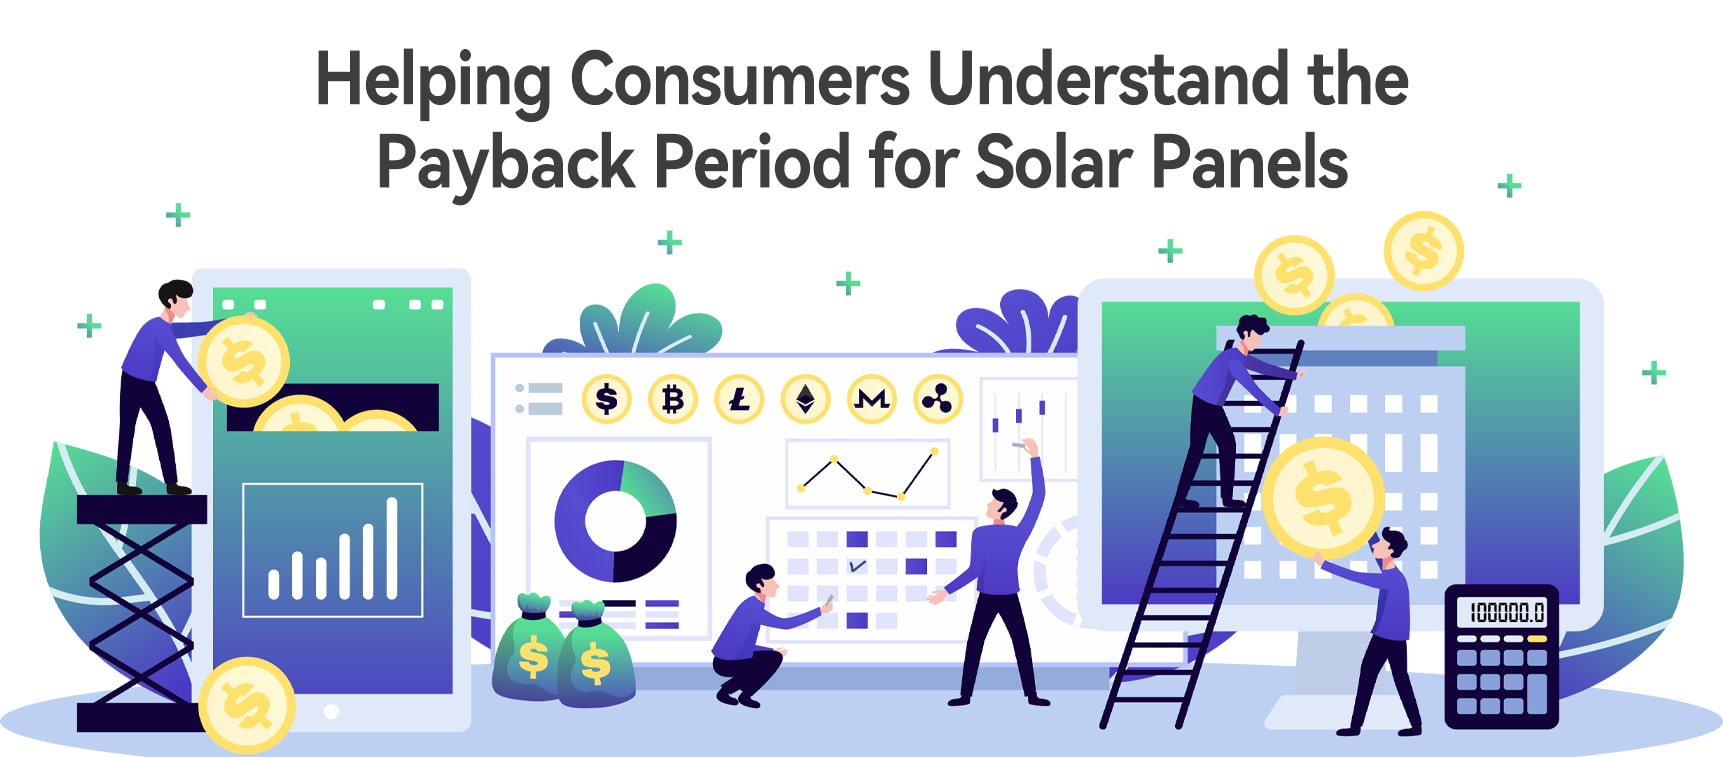 Helping Consumers Understand the Payback Period for Solar Panels